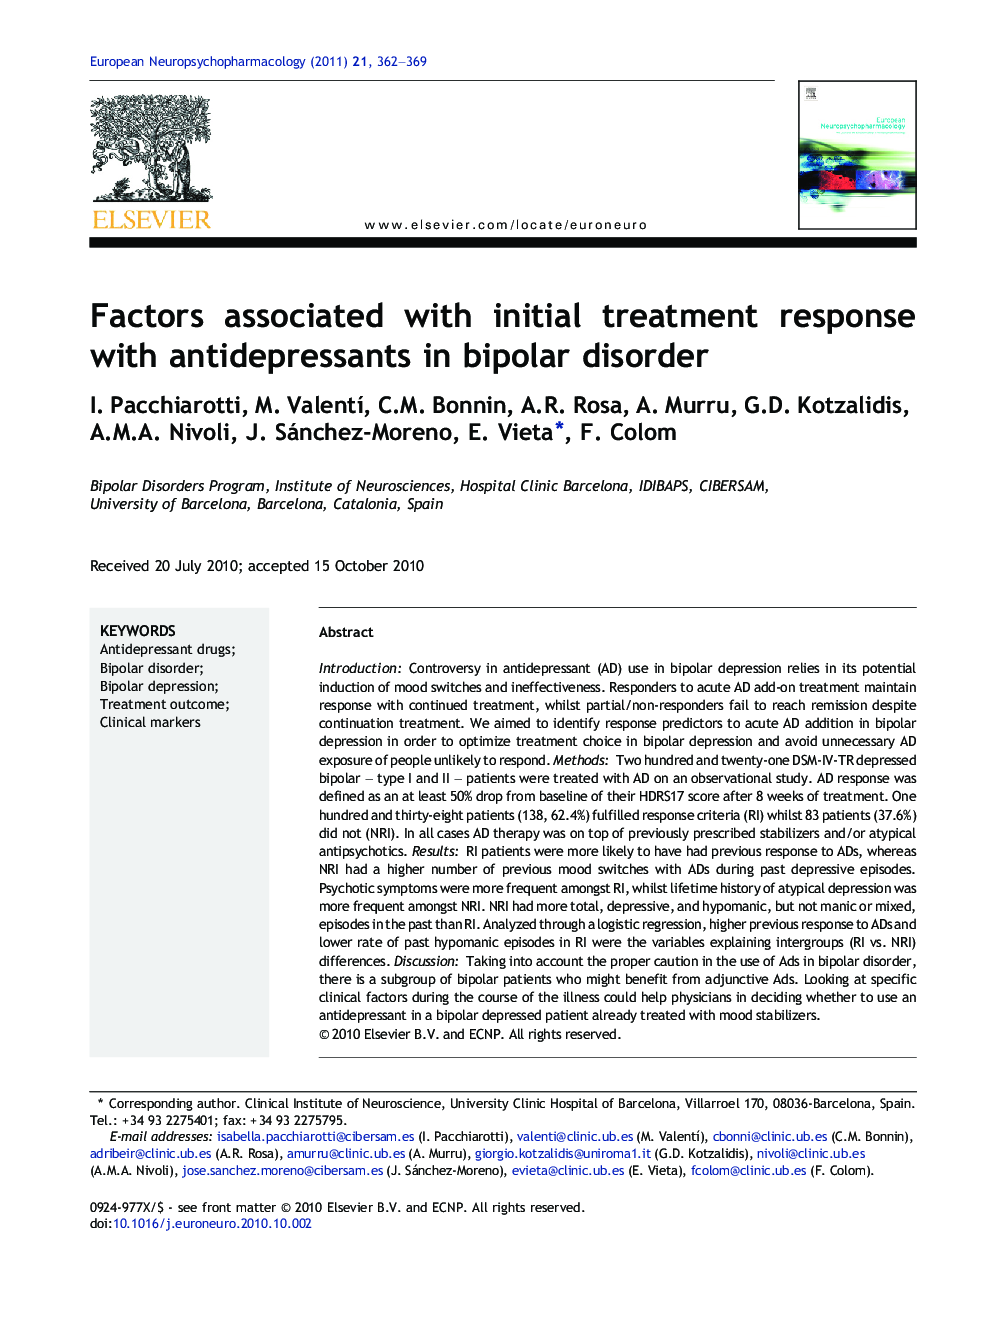 Factors associated with initial treatment response with antidepressants in bipolar disorder